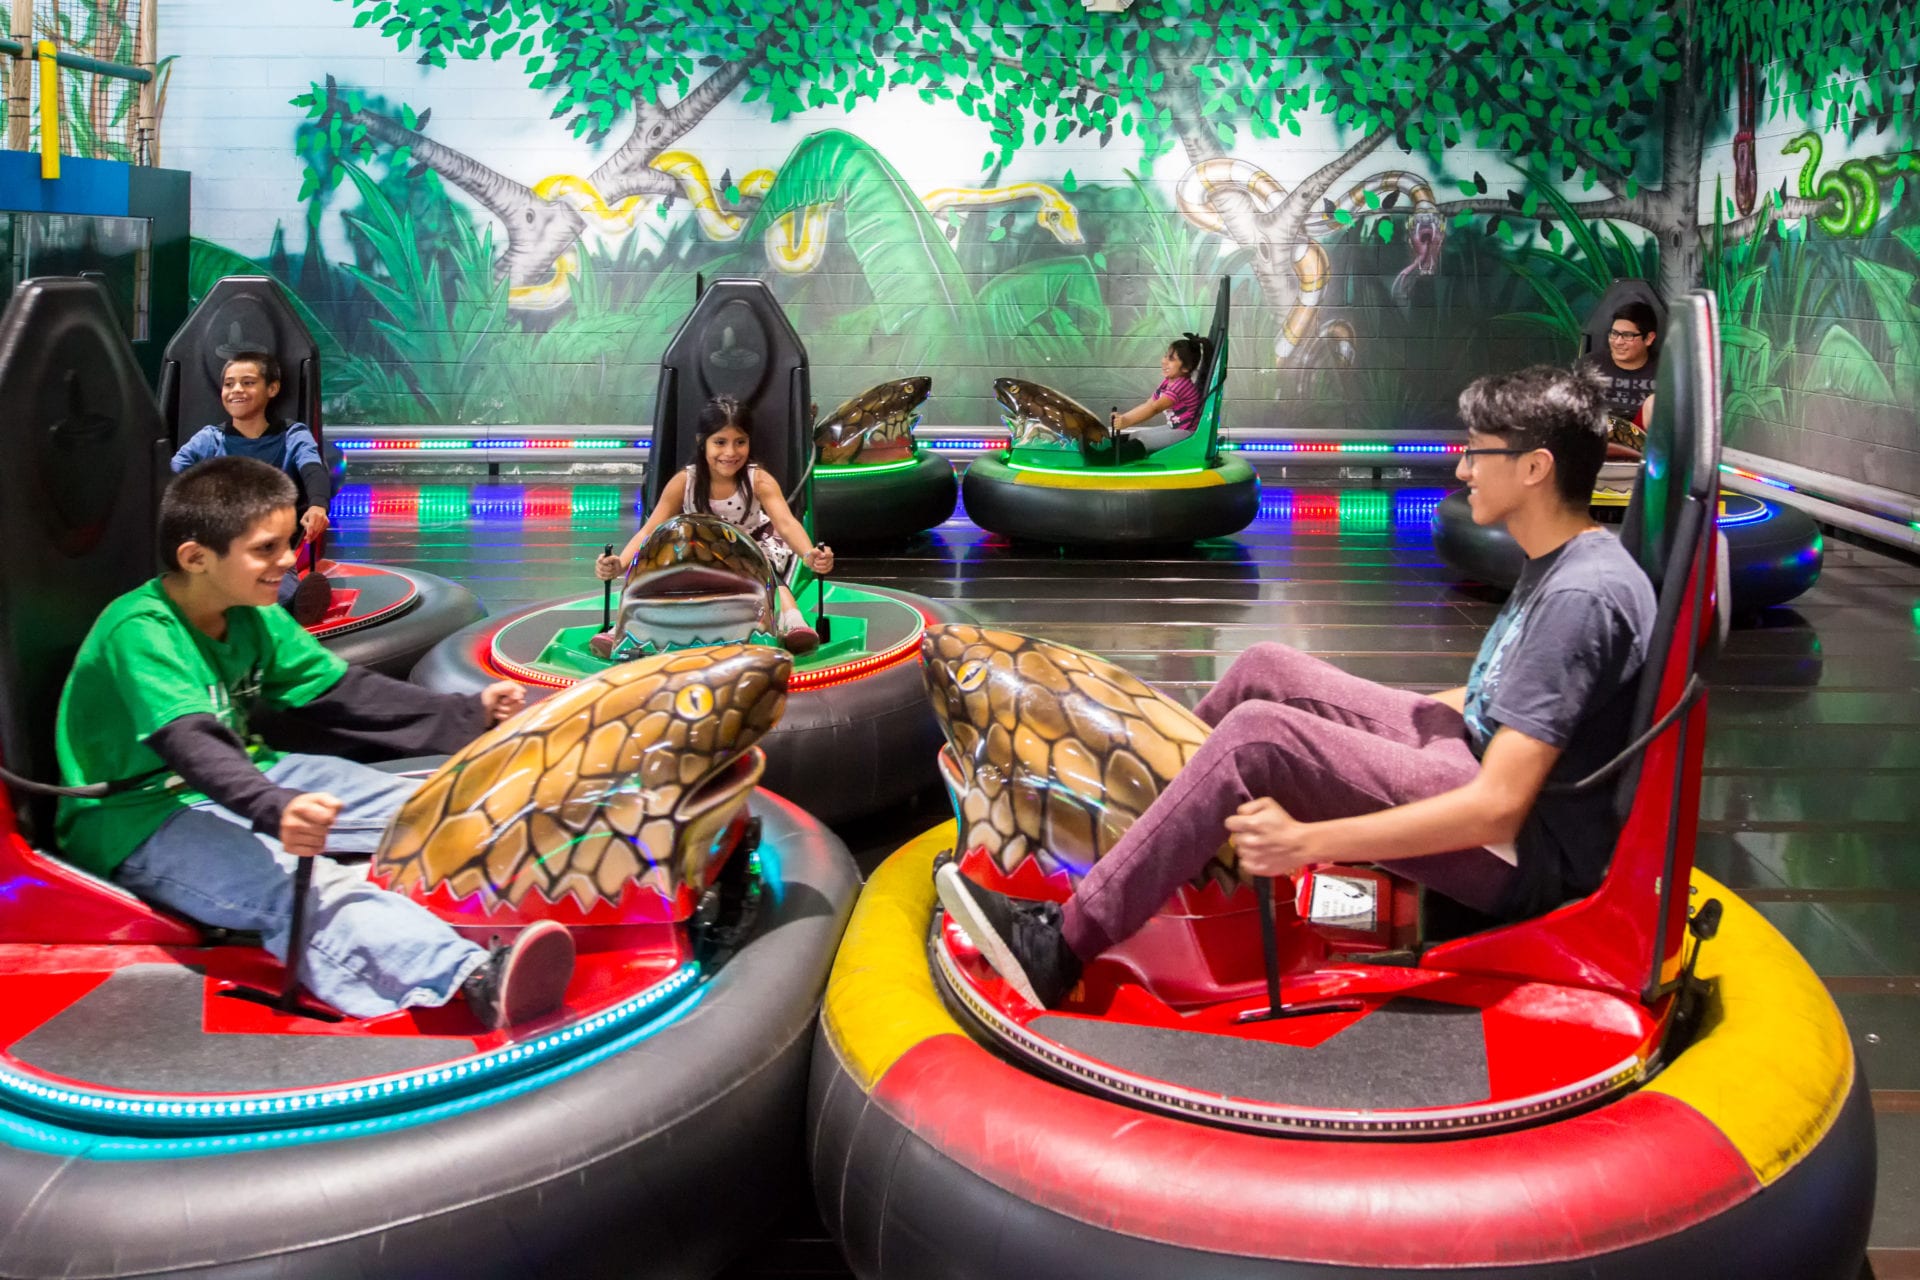 A man and woman are riding on bumper boats.